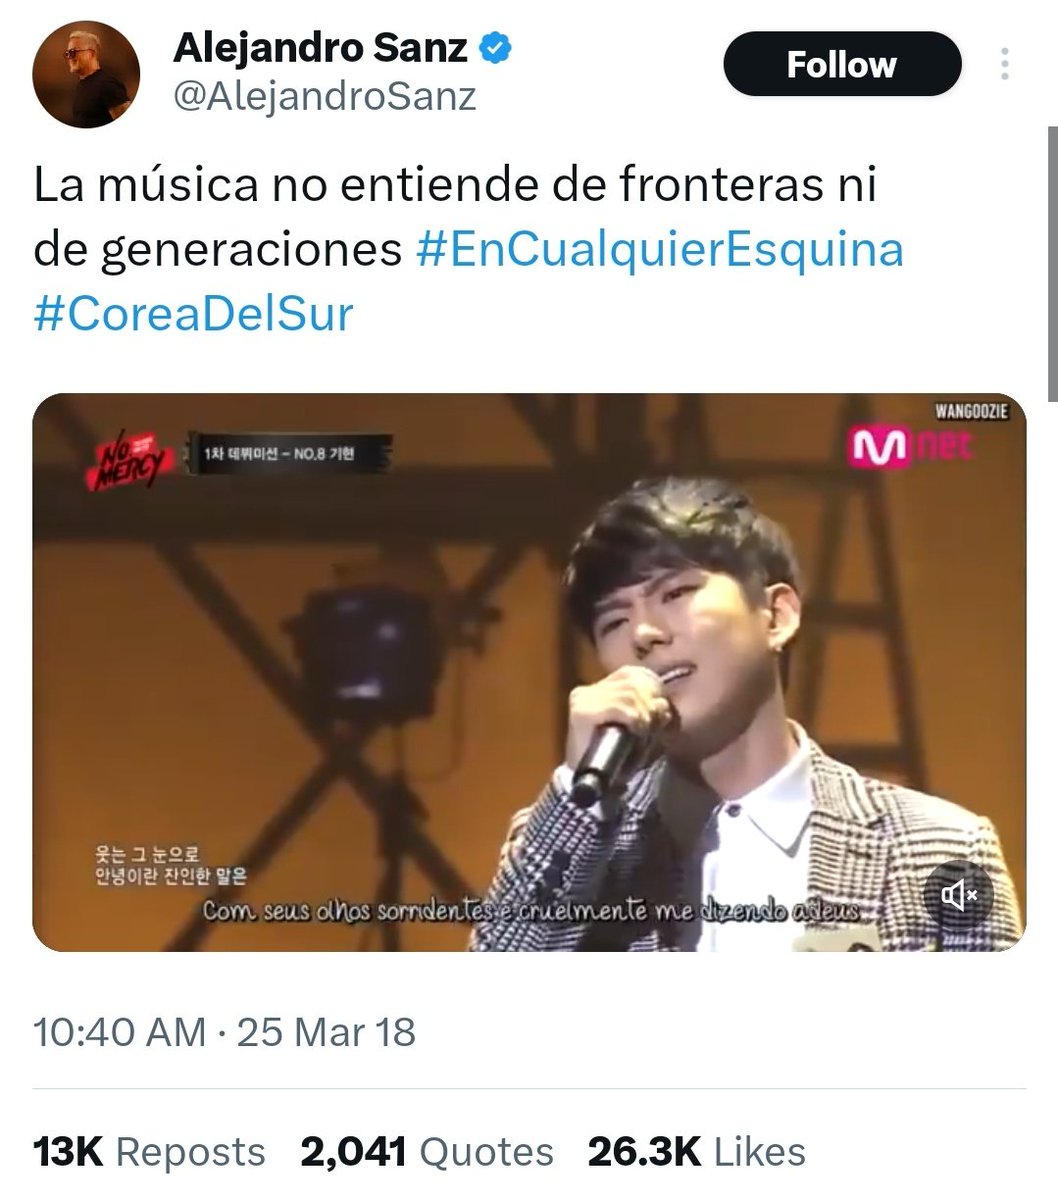 He went so viral that even Alejandro Sanz the Spanish singer of the version 'Y si fuera ella' noticed him acknowledging that music knows no frontiers or generations 👏🏻👏🏻